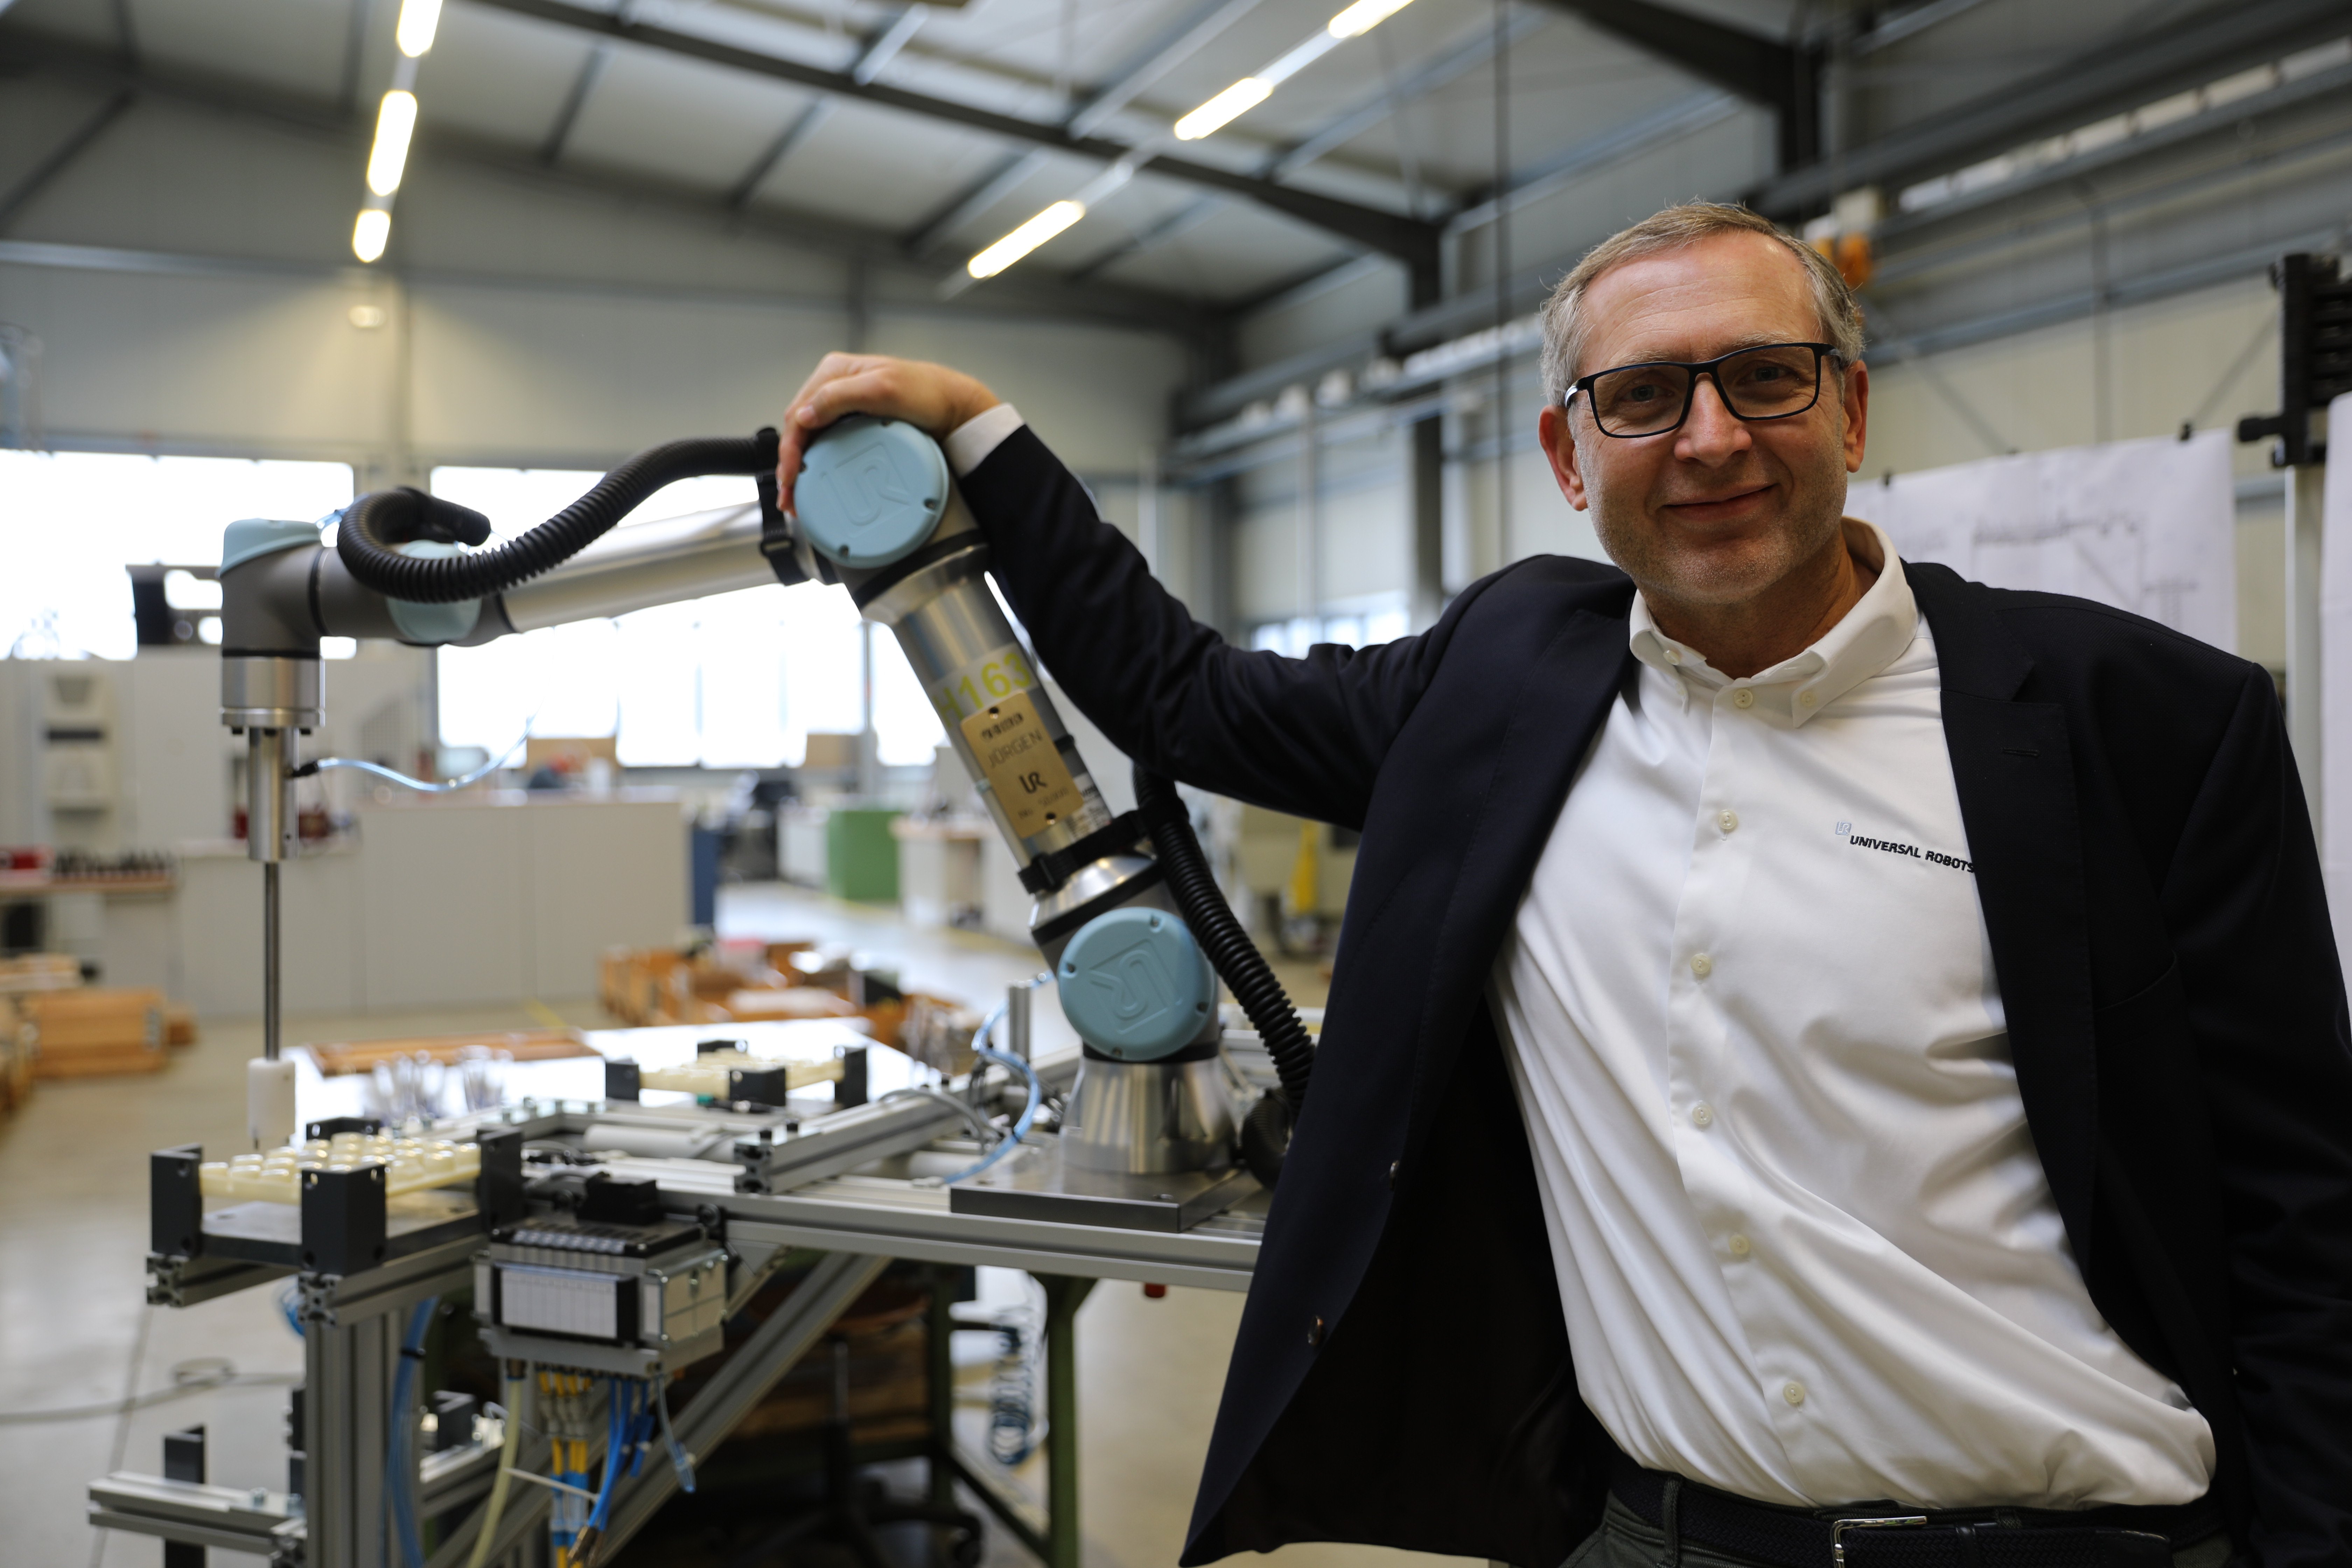 Jürgen Von Hollen, President of Universal Robots, personally handed over the cobot to VEMA GmbH in Germany